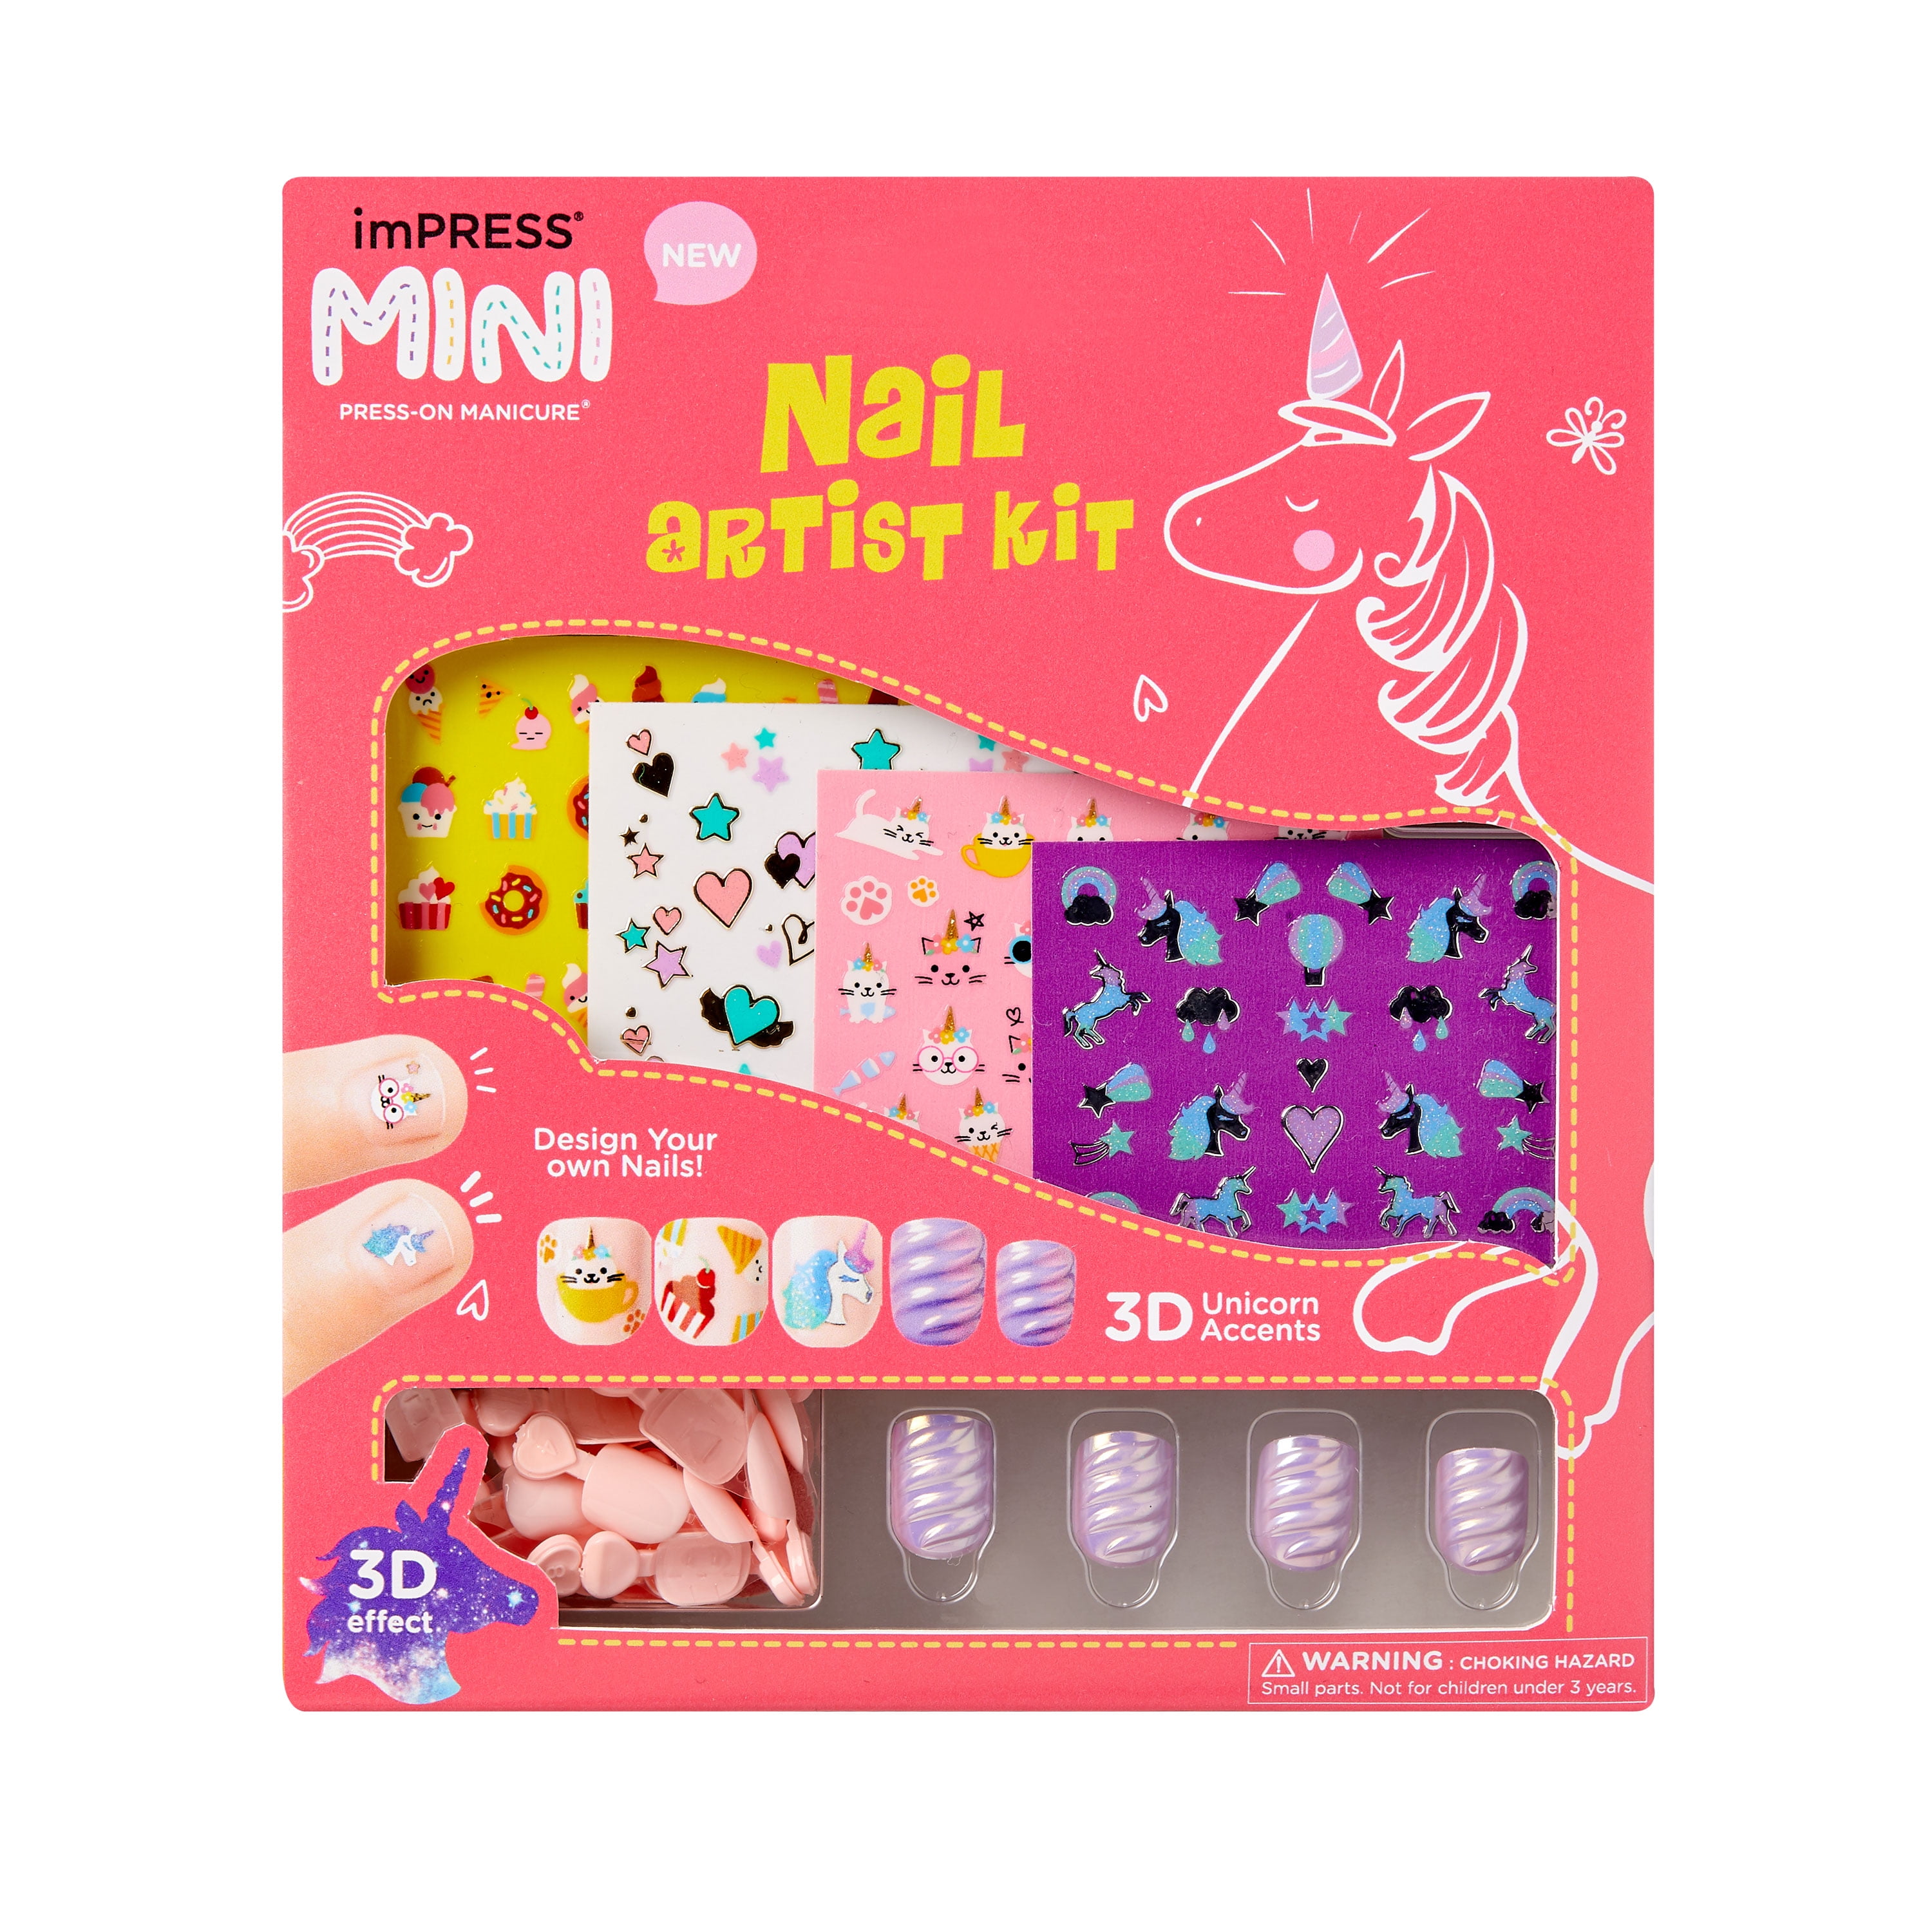 ThanksHow to make your own nail stickers awesome pin | Diy nails stickers,  Diy nails, Nail stickers